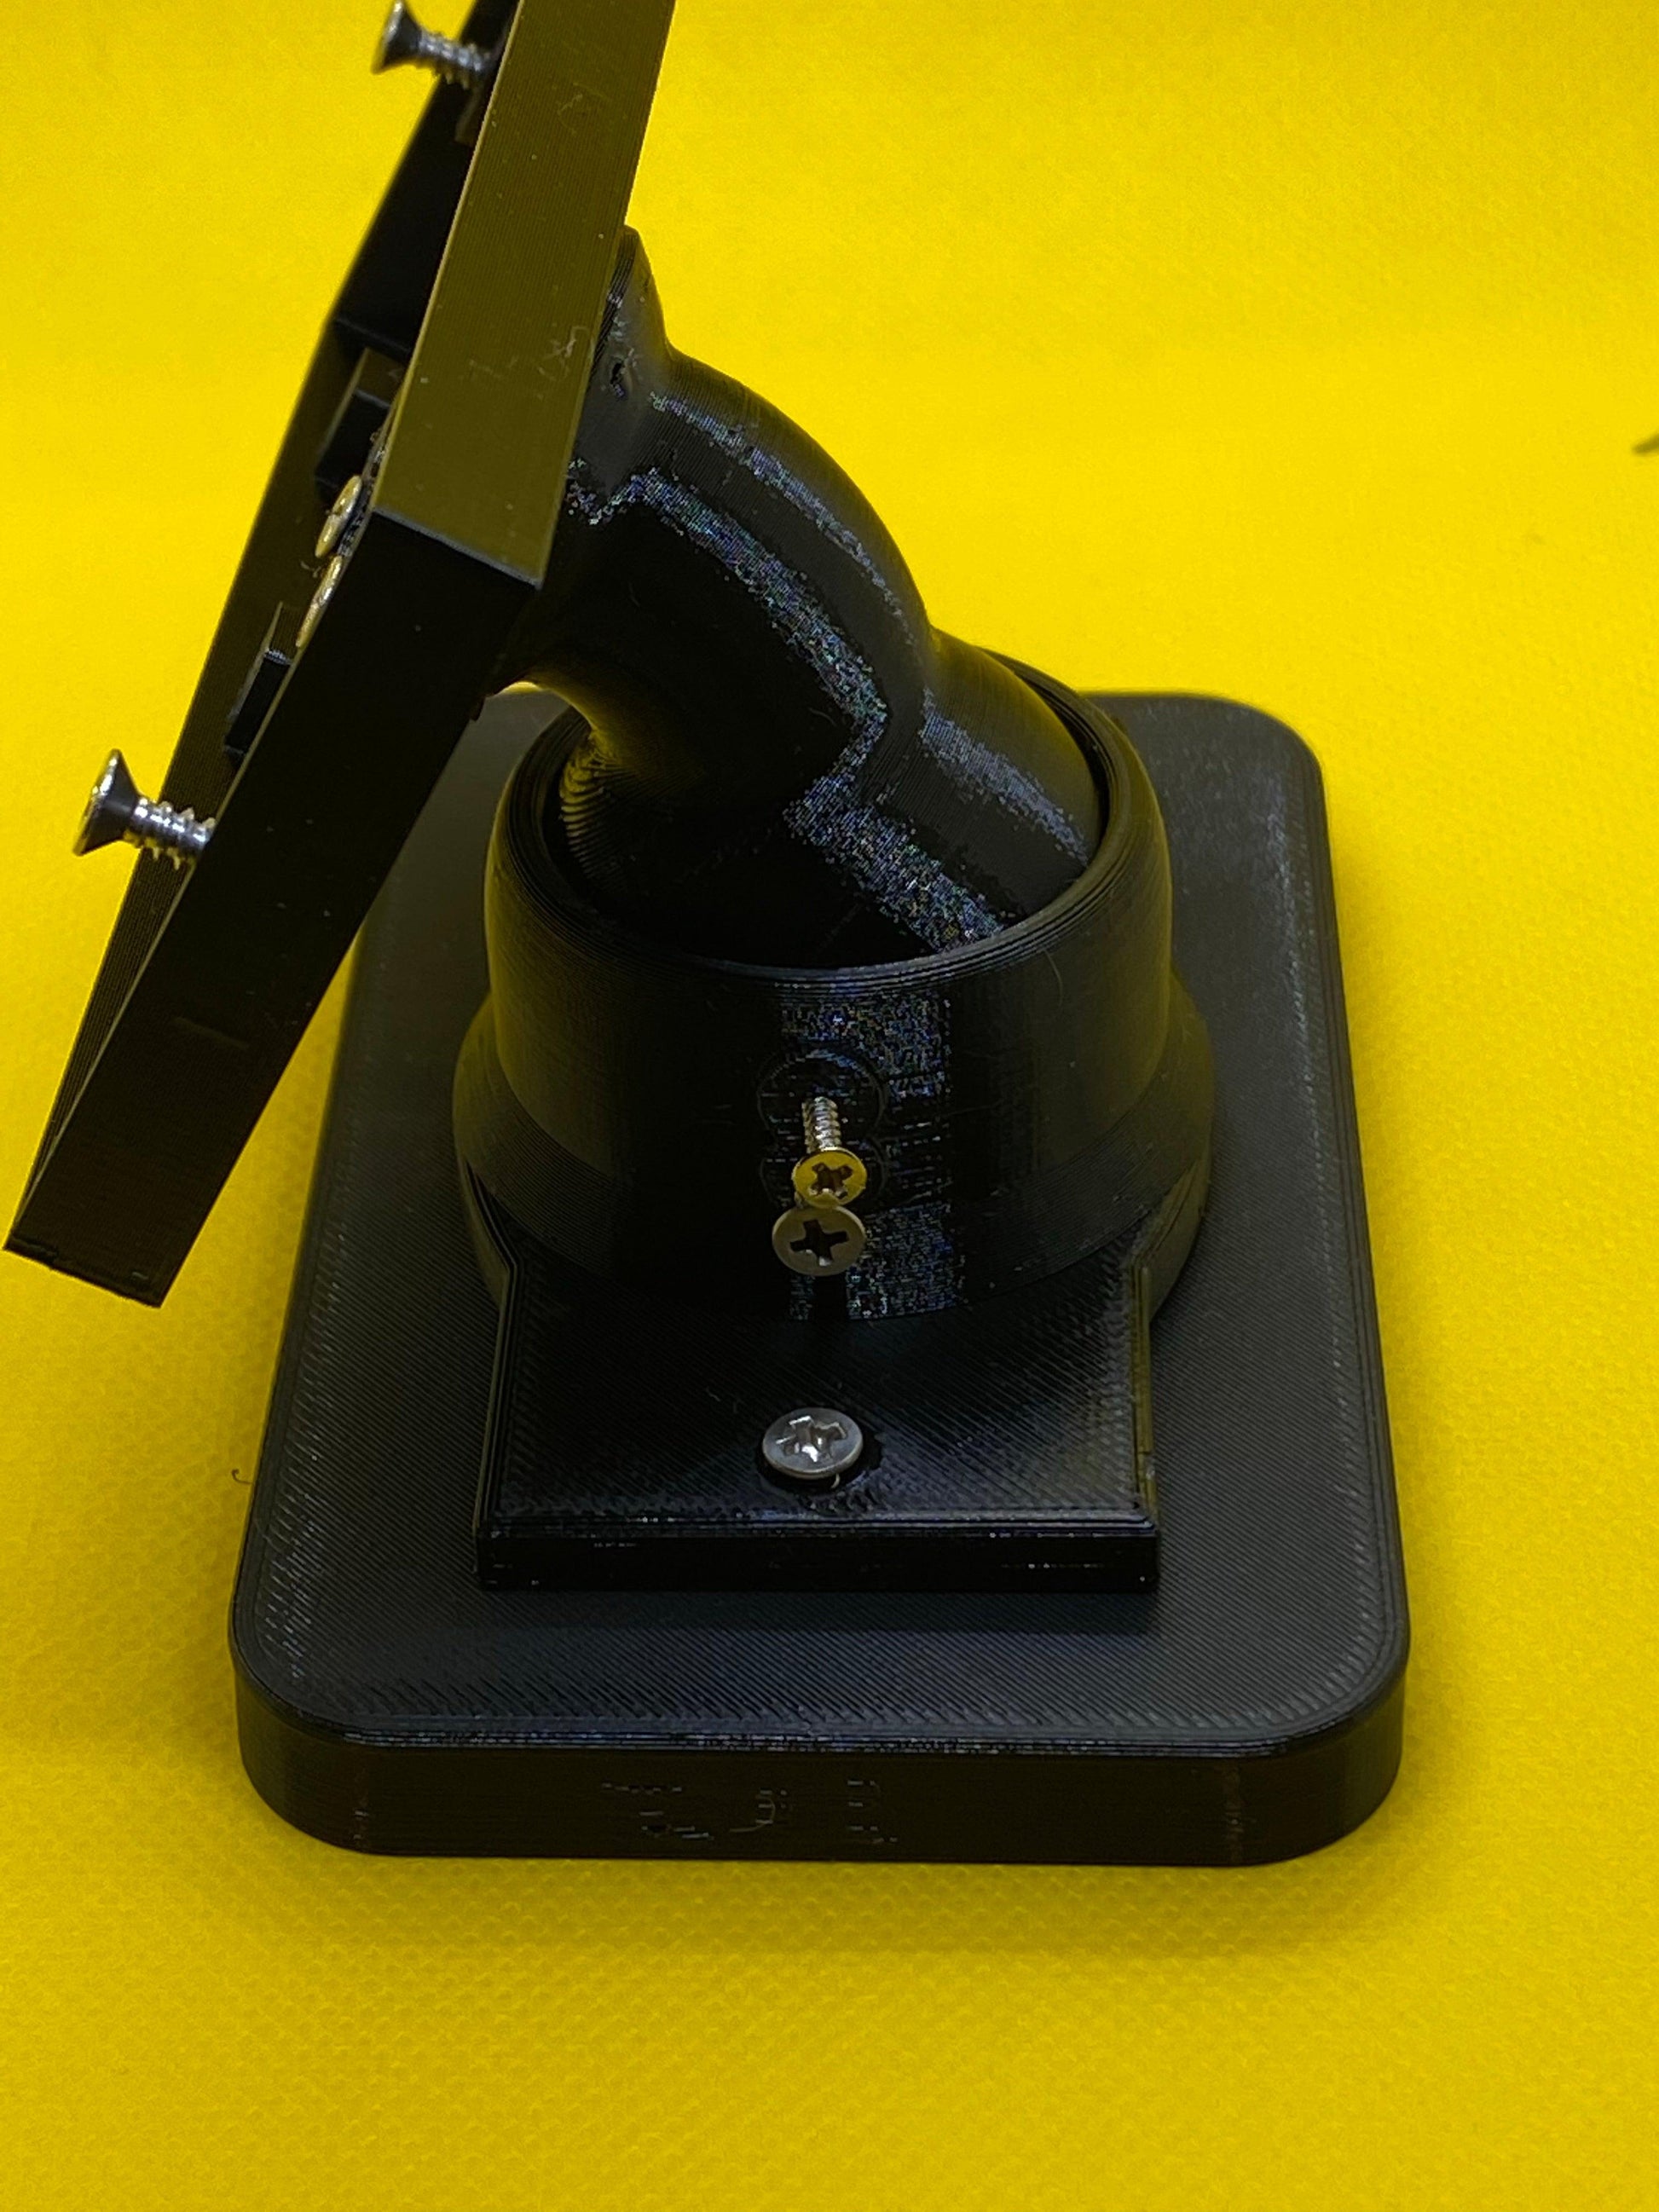 Small Inverted Box Baseplate 2-1/2in x 4in for Adjustable Swivel Mounts - DoorbellMount.Com